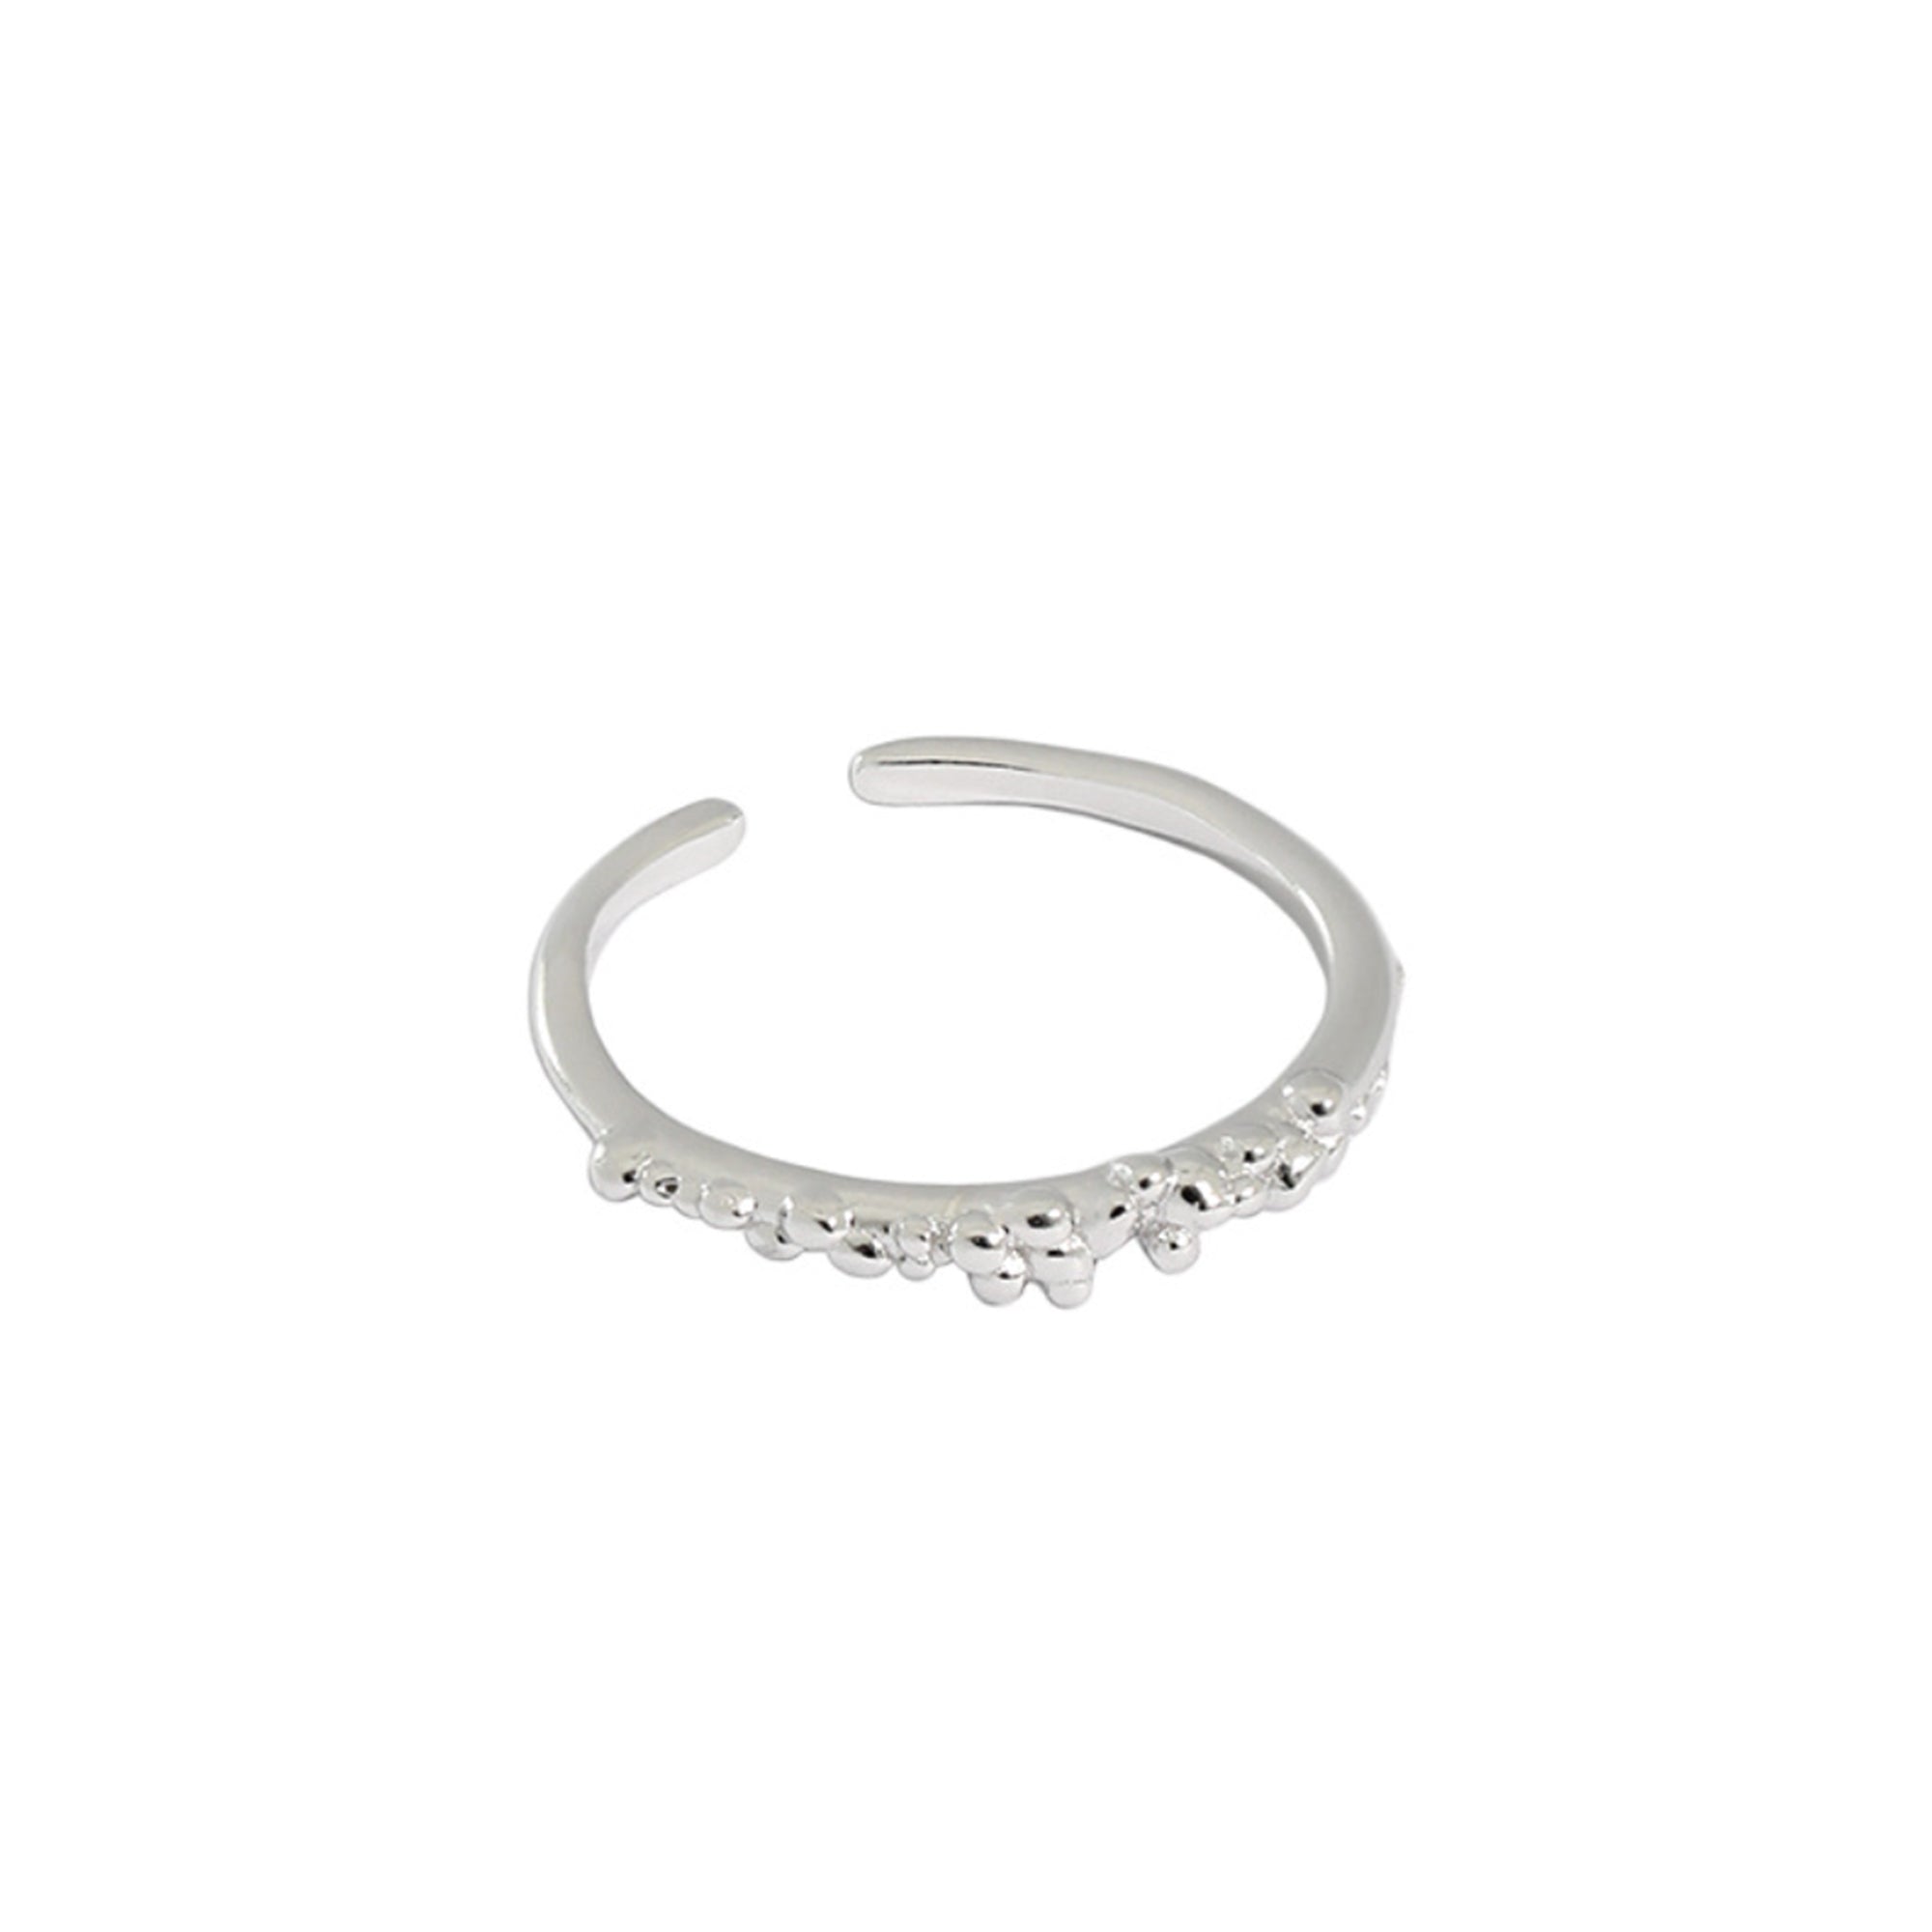 A sterling silver ring with a dainty band and a bubbled texture at the front of the ring.